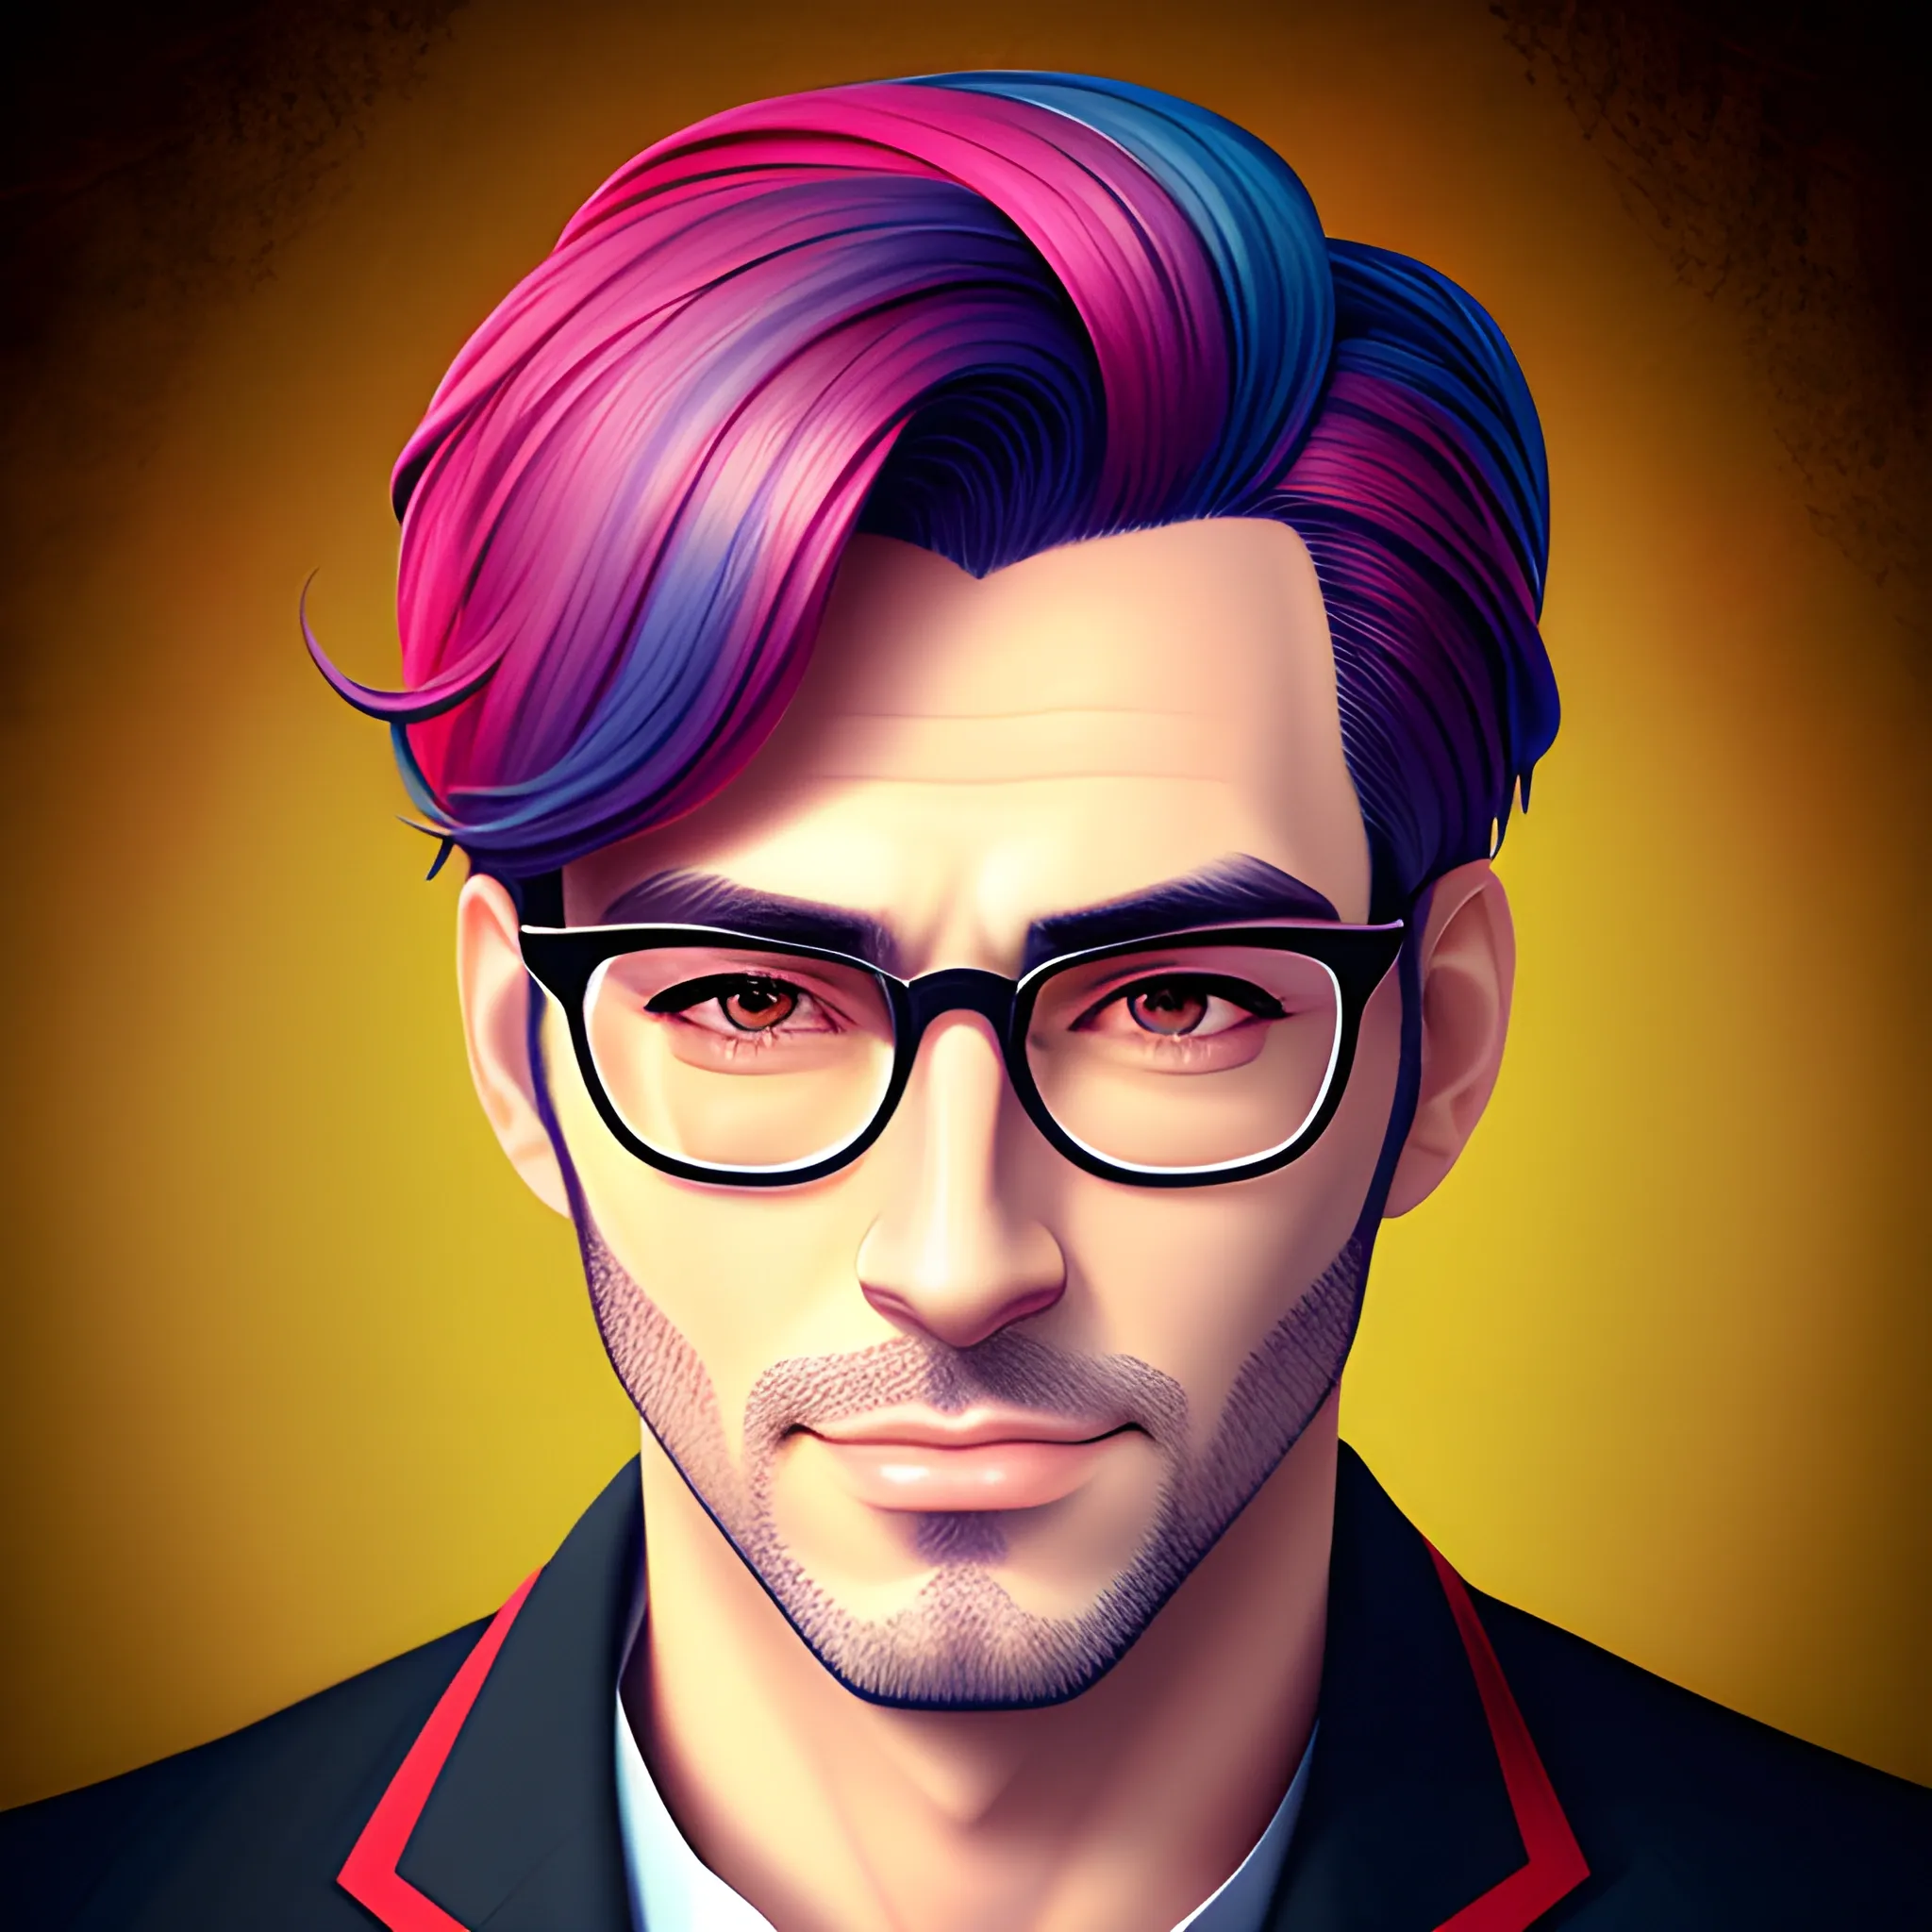 A young online freelancing boy, cute style, colorful anime decoration, hyper-realistic portrait style with eye glasses with no facial hair, high resolution 